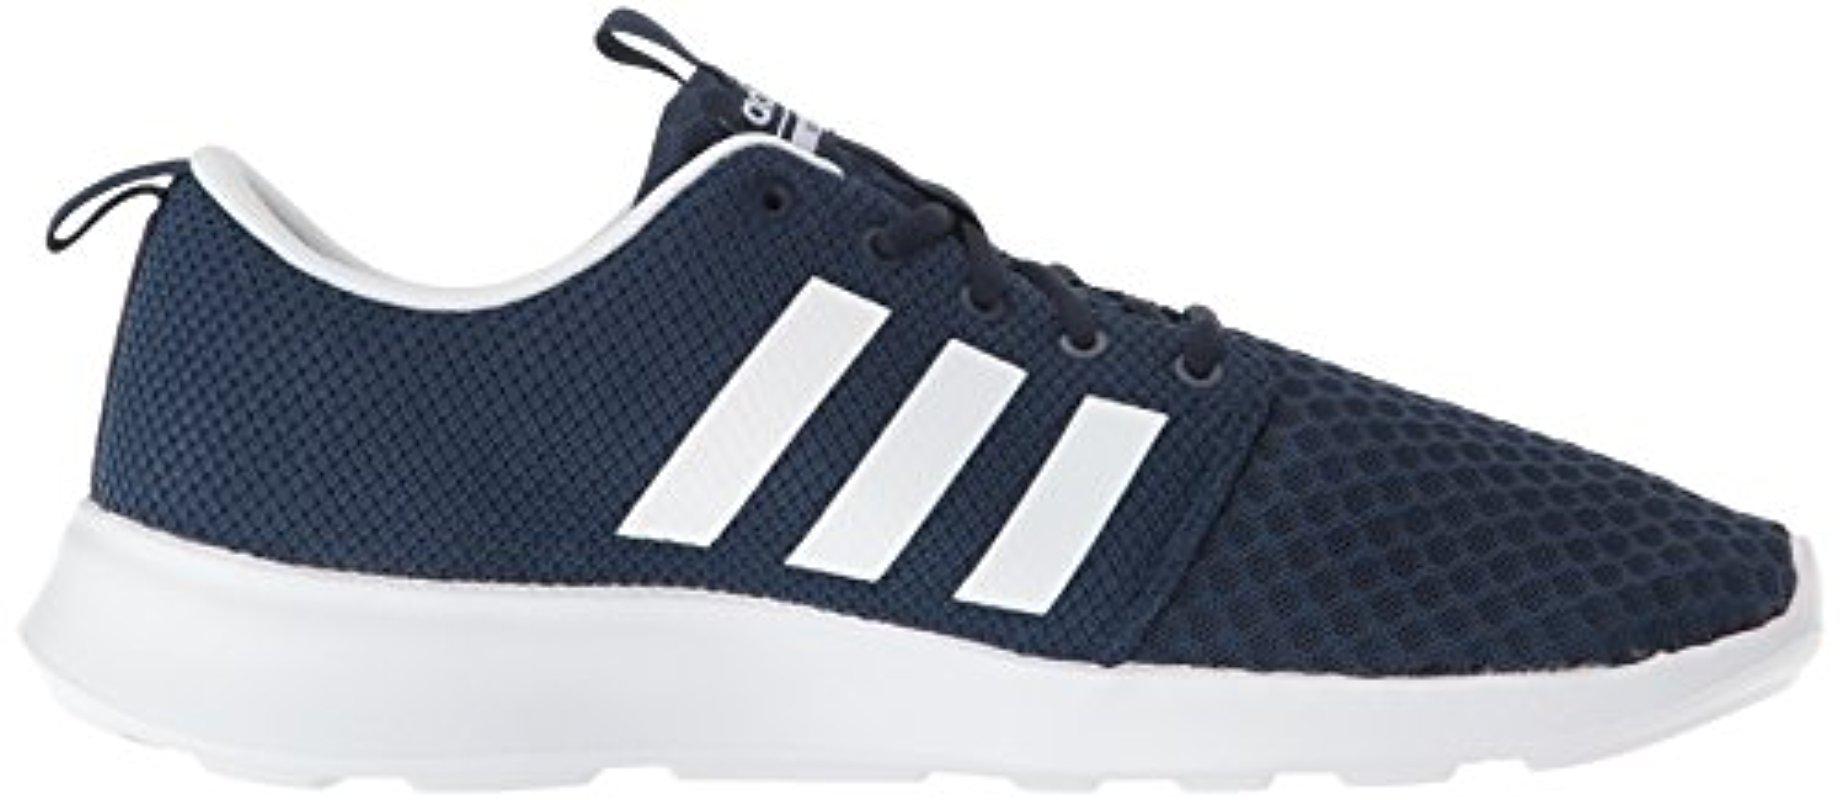 adidas swift racer shoes